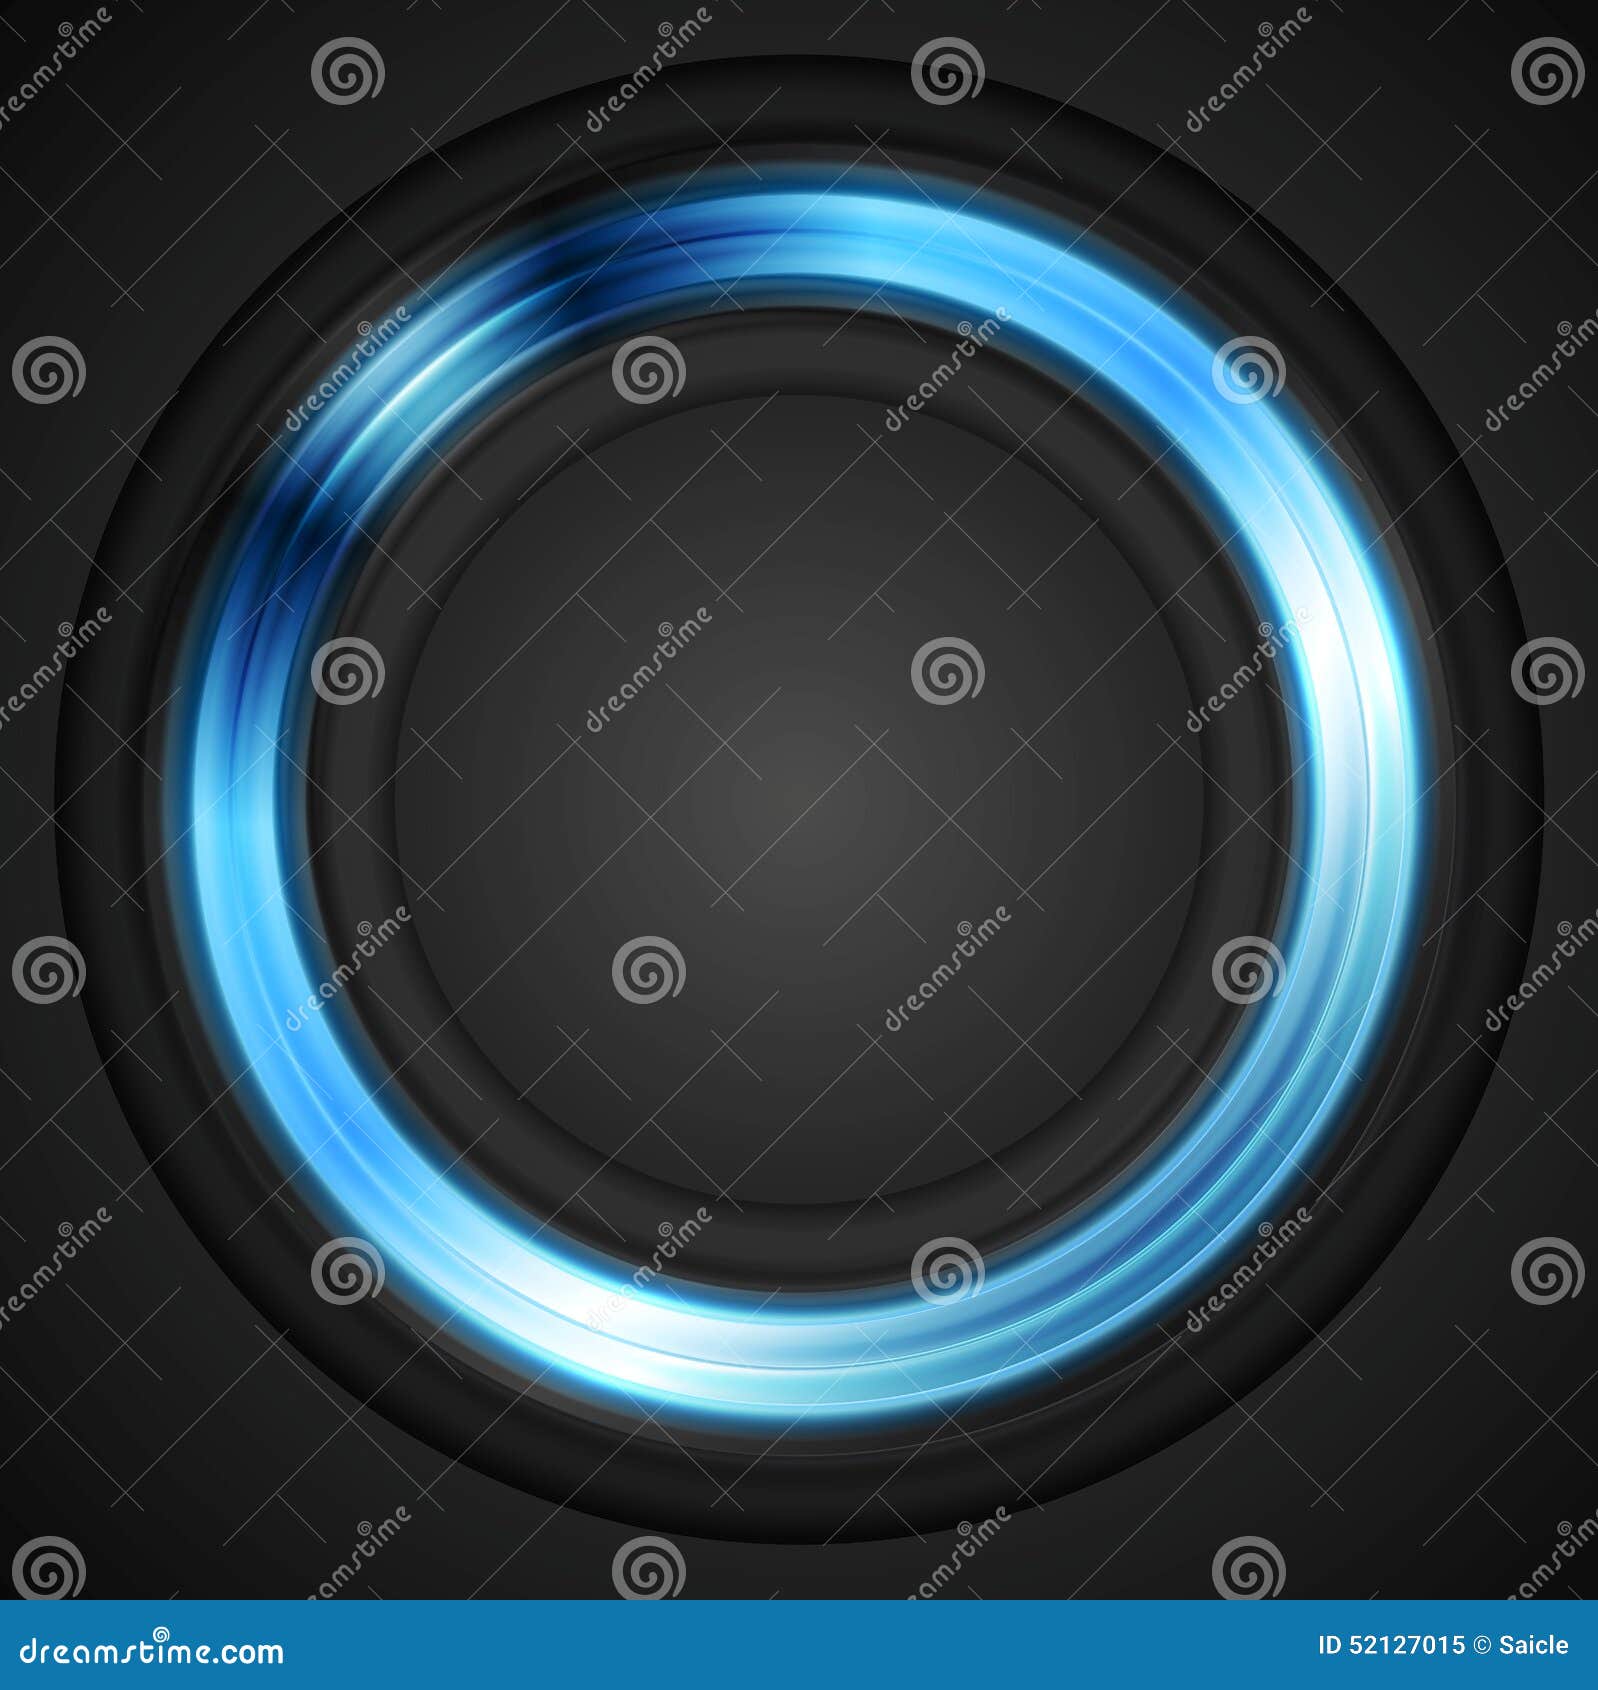 Blue Glowing Circle Vector Logo Stock Vector - Illustration of abstract ...